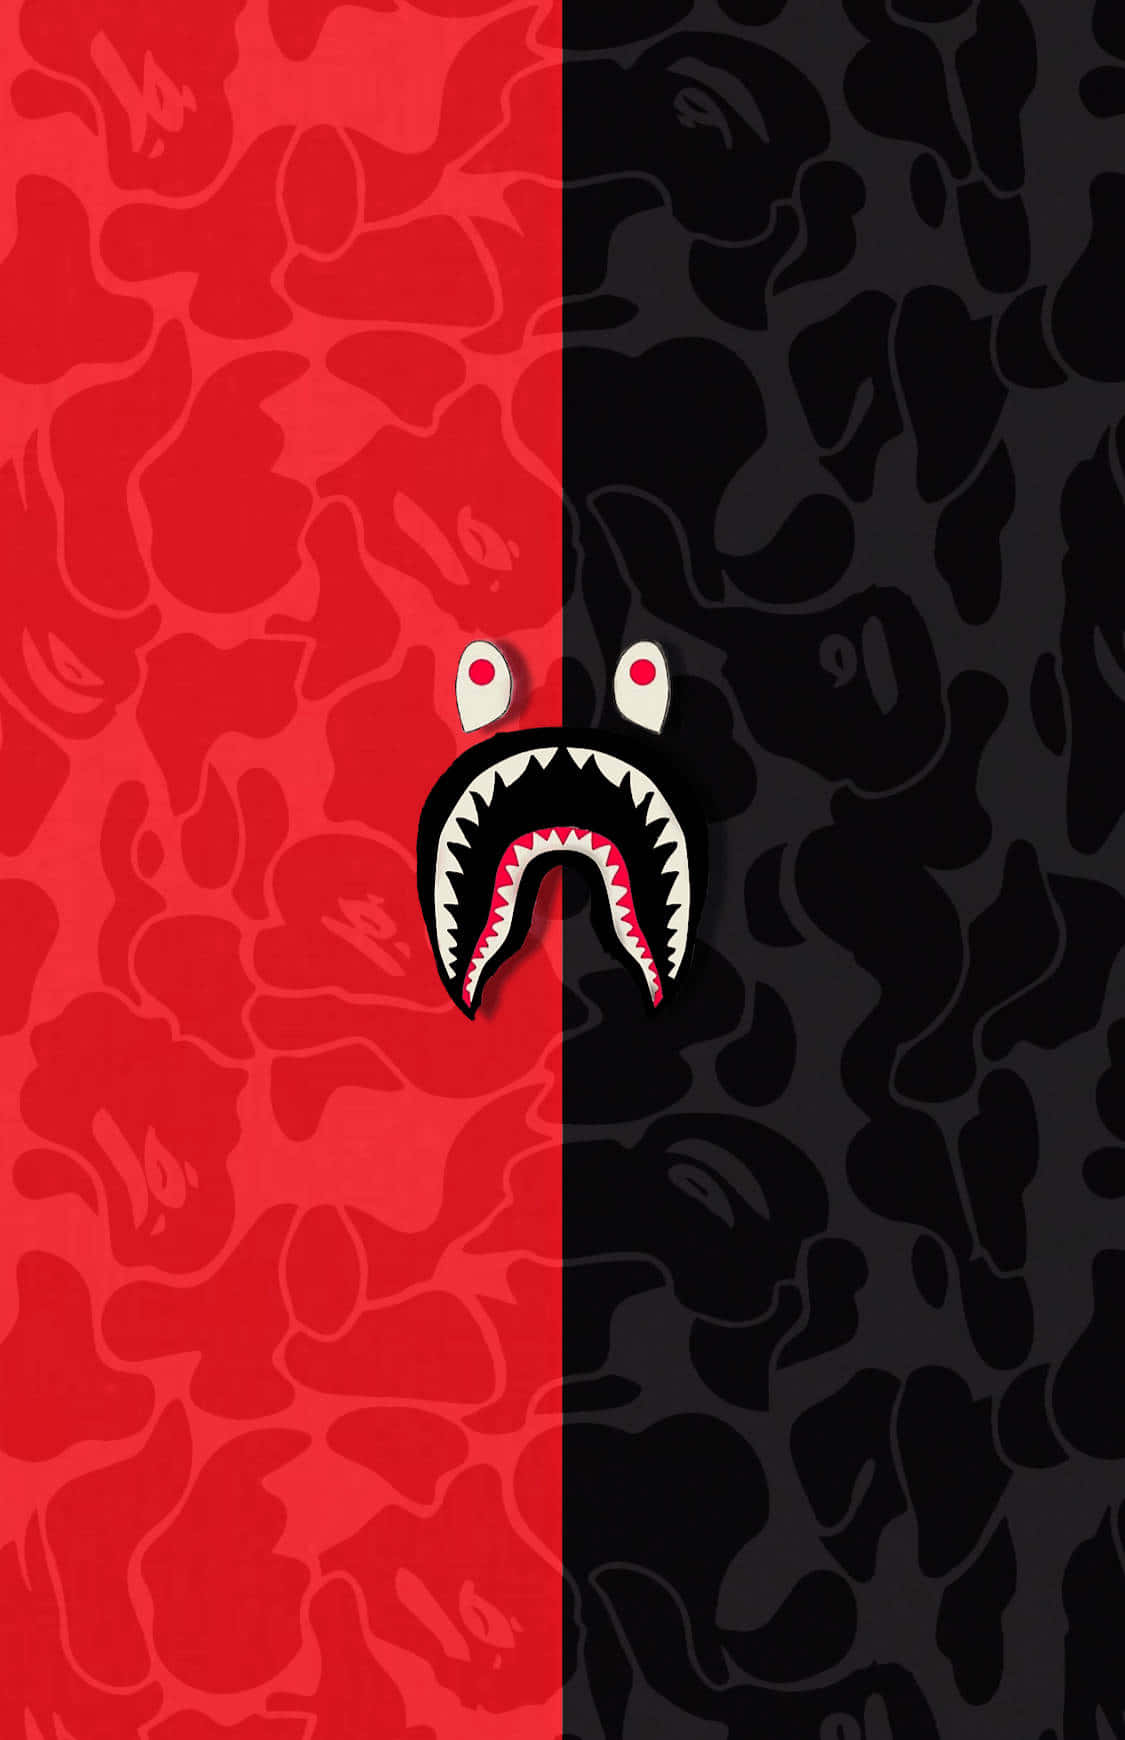 Show off your Bape style with this colourful Iphone 6 Wallpaper